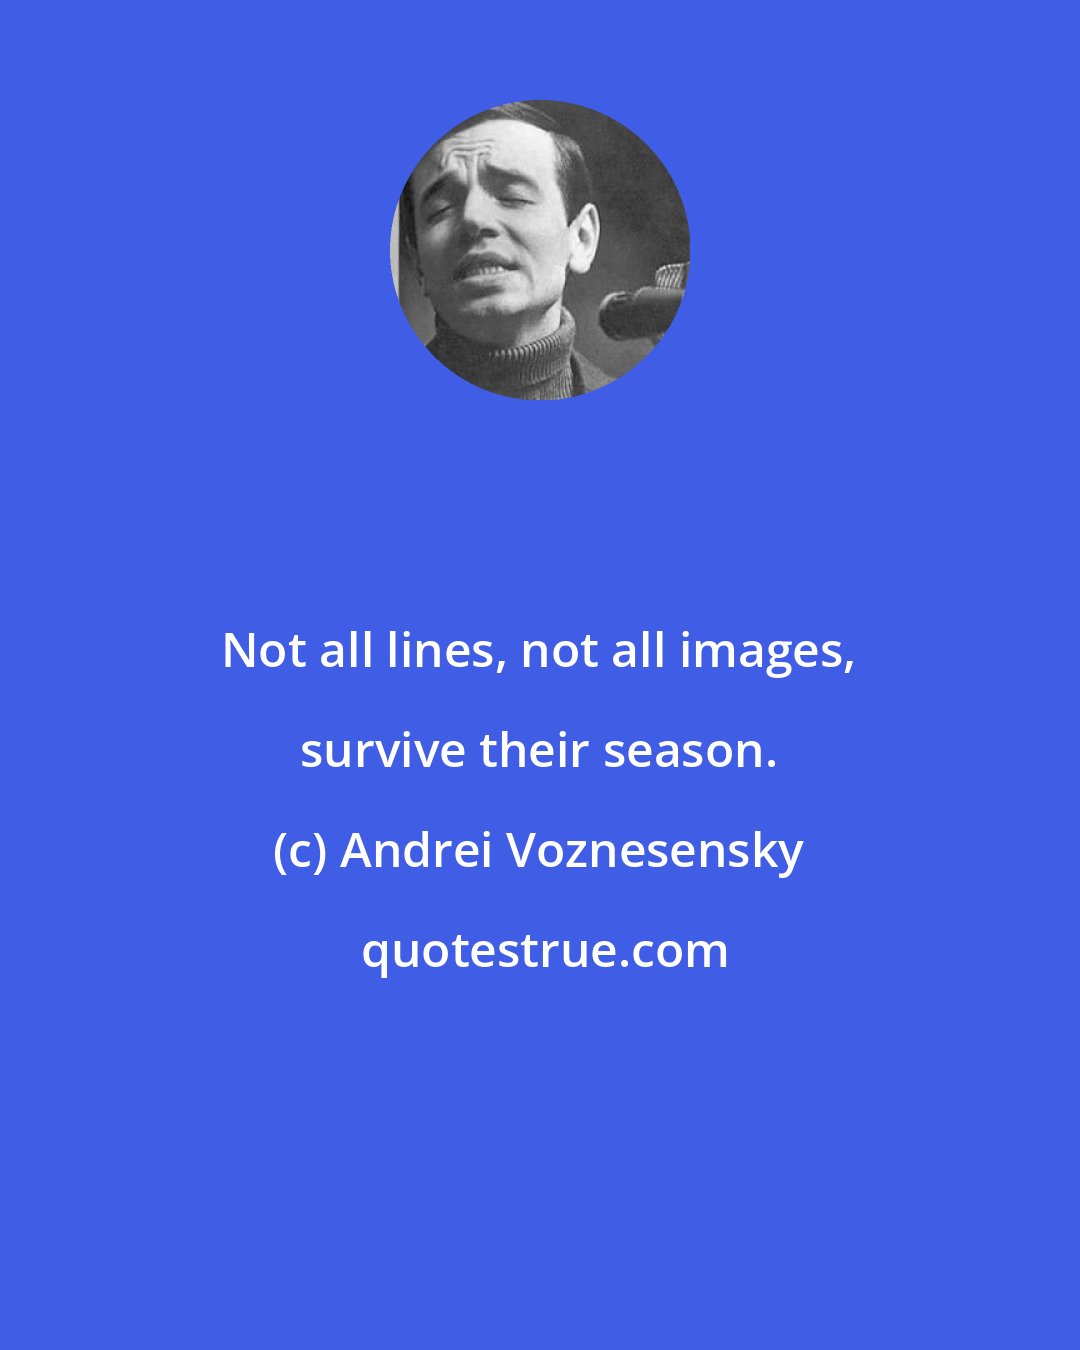 Andrei Voznesensky: Not all lines, not all images, survive their season.